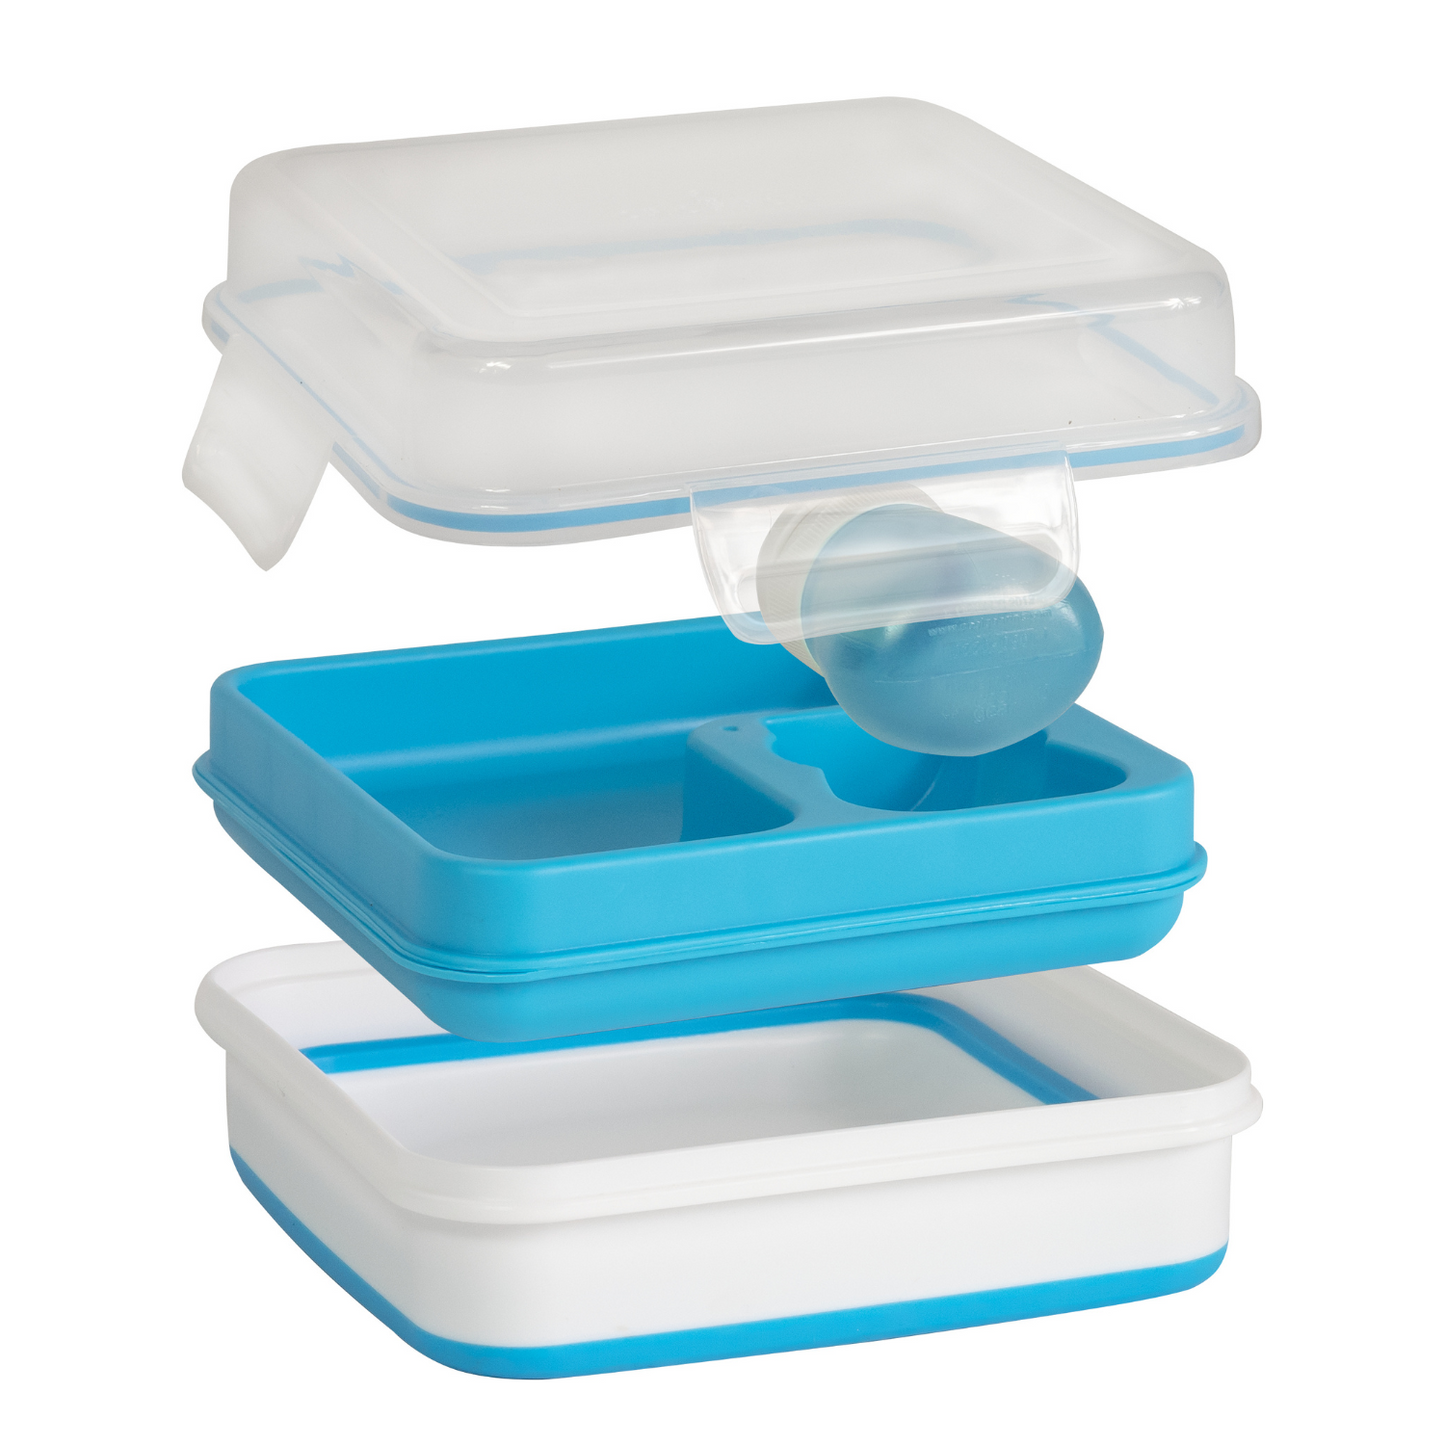 Goodful Gray Lunch To Go Salad Container System - Shop Travel & To